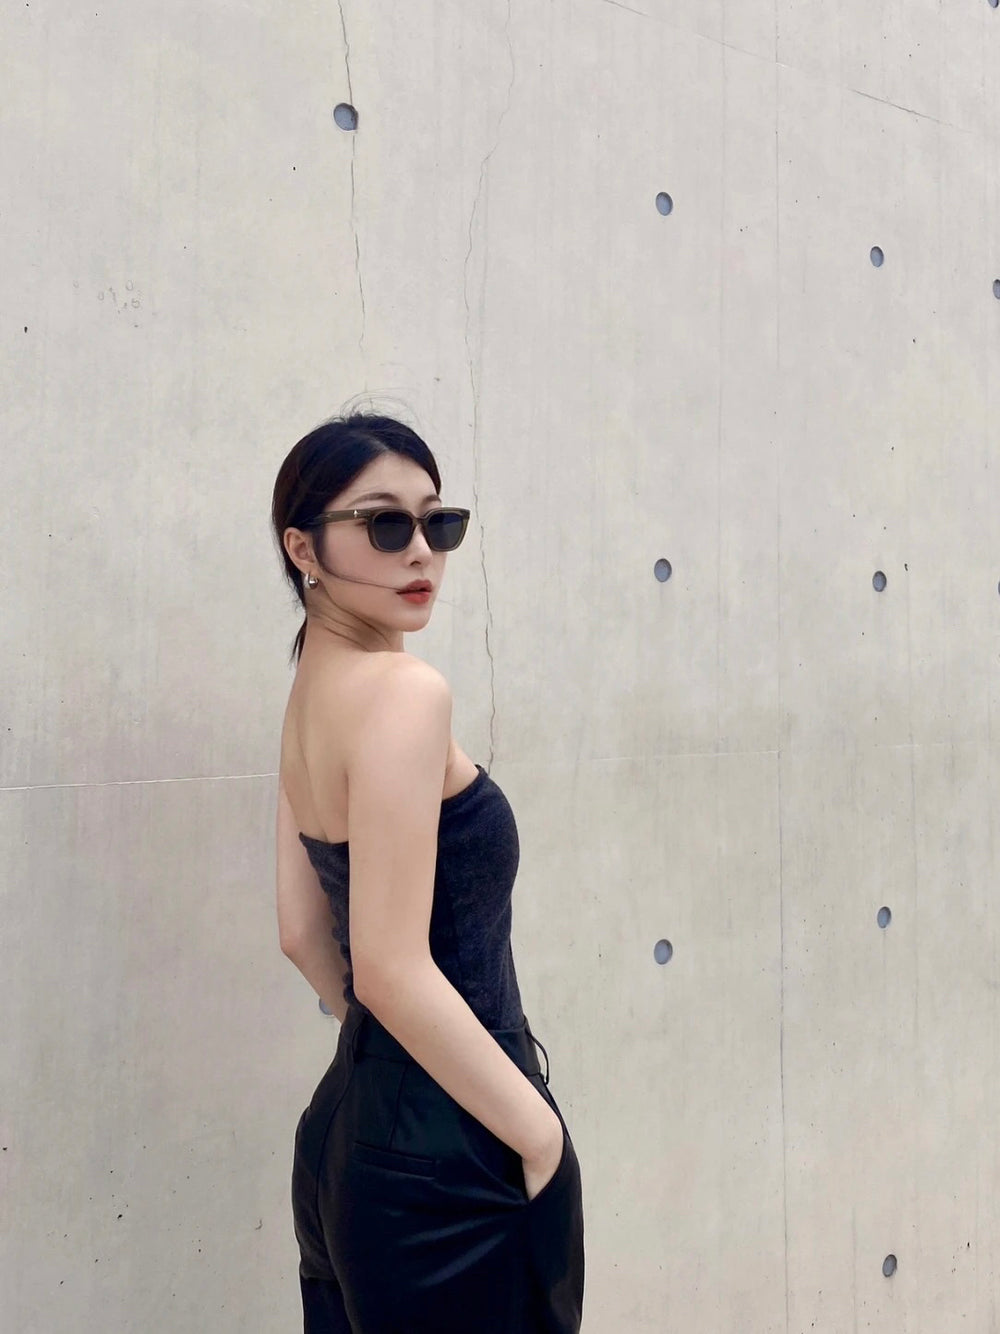 A captivating woman exudes elegance in her sleek black dress, complemented by stylish sunglasses. She exudes an air of mystery and sophistication. 